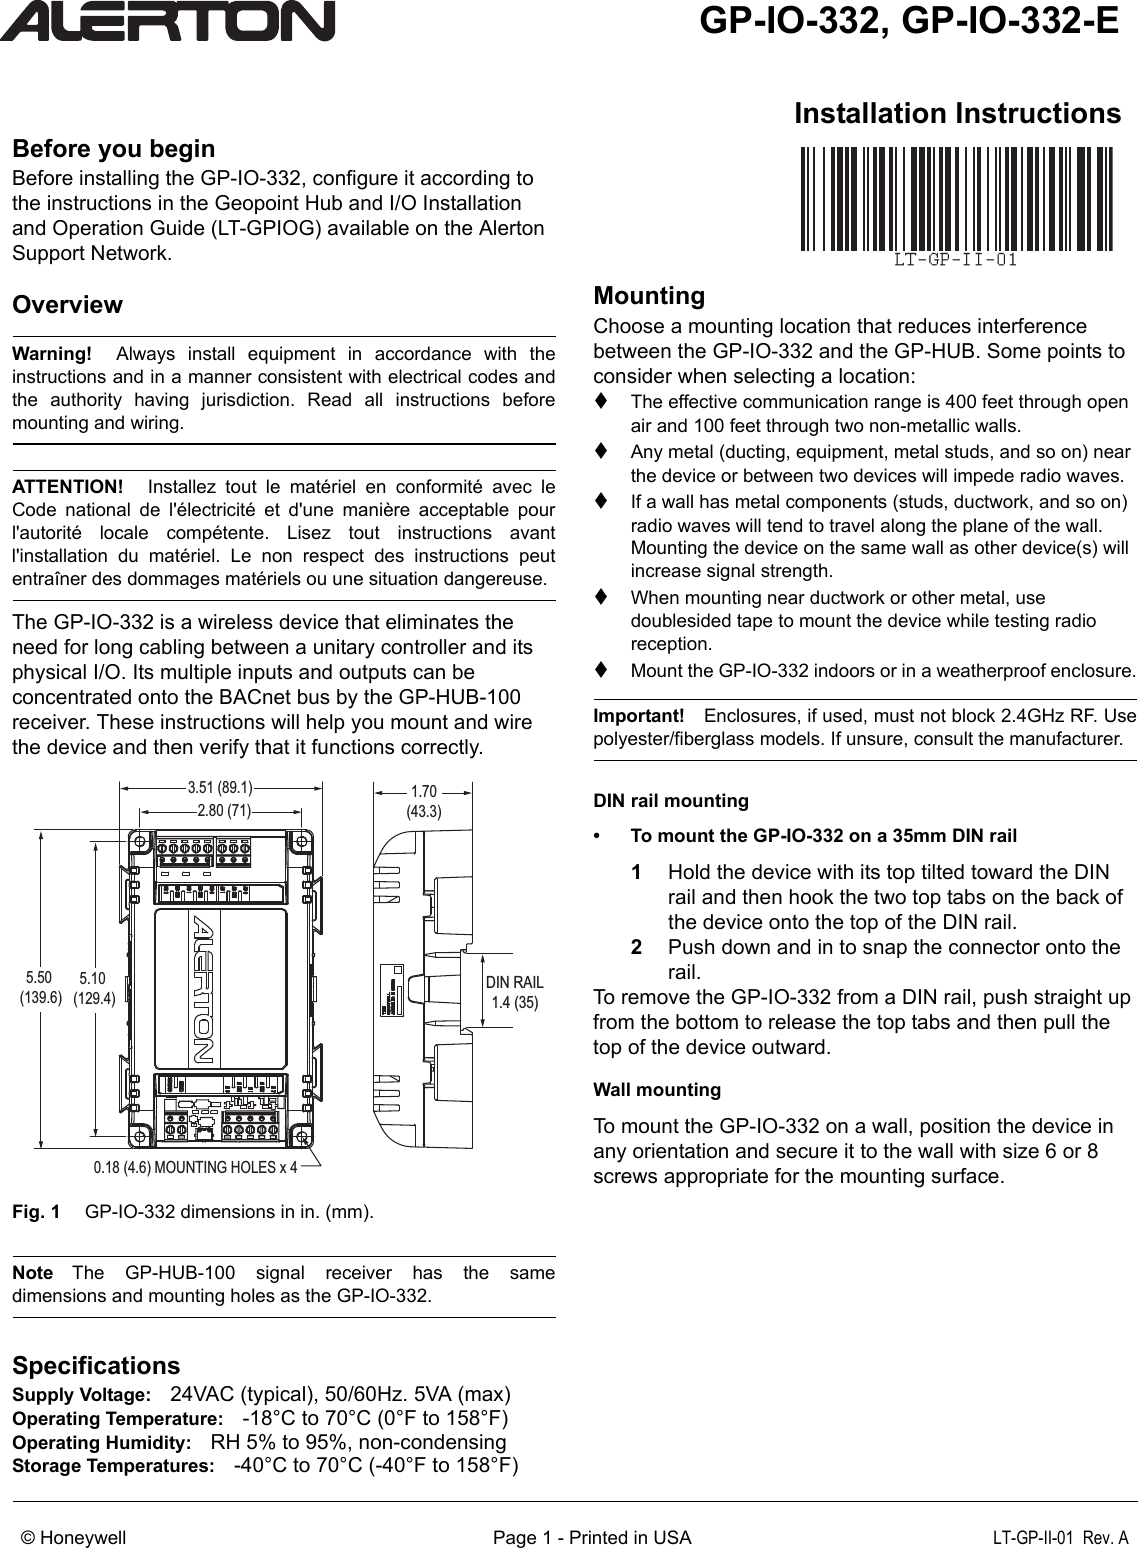 Installation InstructionsGP-IO-332, GP-IO-332-E© Honeywell      Page 1 - Printed in USA LT-GP-II-01  Rev. ABefore you beginBefore installing the GP-IO-332, configure it according to the instructions in the Geopoint Hub and I/O Installation and Operation Guide (LT-GPIOG) available on the Alerton Support Network.OverviewWarning!  Always install equipment in accordance with theinstructions and in a manner consistent with electrical codes andthe authority having jurisdiction. Read all instructions beforemounting and wiring.ATTENTION!  Installez tout le matériel en conformité avec leCode national de l&apos;électricité et d&apos;une manière acceptable pourl&apos;autorité locale compétente. Lisez tout instructions avantl&apos;installation du matériel. Le non respect des instructions peutentraîner des dommages matériels ou une situation dangereuse.The GP-IO-332 is a wireless device that eliminates the need for long cabling between a unitary controller and its physical I/O. Its multiple inputs and outputs can be concentrated onto the BACnet bus by the GP-HUB-100 receiver. These instructions will help you mount and wire the device and then verify that it functions correctly. Fig. 1  GP-IO-332 dimensions in in. (mm). Note The GP-HUB-100 signal receiver has the samedimensions and mounting holes as the GP-IO-332.SpecificationsSupply Voltage: 24VAC (typical), 50/60Hz. 5VA (max)Operating Temperature: -18°C to 70°C (0°F to 158°F)Operating Humidity: RH 5% to 95%, non-condensingStorage Temperatures: -40°C to 70°C (-40°F to 158°F)MountingChoose a mounting location that reduces interference between the GP-IO-332 and the GP-HUB. Some points to consider when selecting a location:The effective communication range is 400 feet through open air and 100 feet through two non-metallic walls.Any metal (ducting, equipment, metal studs, and so on) near the device or between two devices will impede radio waves.If a wall has metal components (studs, ductwork, and so on) radio waves will tend to travel along the plane of the wall. Mounting the device on the same wall as other device(s) will increase signal strength.When mounting near ductwork or other metal, use doublesided tape to mount the device while testing radio reception.Mount the GP-IO-332 indoors or in a weatherproof enclosure.Important! Enclosures, if used, must not block 2.4GHz RF. Usepolyester/fiberglass models. If unsure, consult the manufacturer.DIN rail mounting• To mount the GP-IO-332 on a 35mm DIN rail1Hold the device with its top tilted toward the DIN rail and then hook the two top tabs on the back of the device onto the top of the DIN rail.2Push down and in to snap the connector onto the rail.To remove the GP-IO-332 from a DIN rail, push straight up from the bottom to release the top tabs and then pull the top of the device outward.Wall mountingTo mount the GP-IO-332 on a wall, position the device in any orientation and secure it to the wall with size 6 or 8 screws appropriate for the mounting surface.5.50 (139.6)5.10 (129.4)2.80 (71)3.51 (89.1) 1.70(43.3)0.18 (4.6) MOUNTING HOLES x 4DIN RAIL1.4 (35)